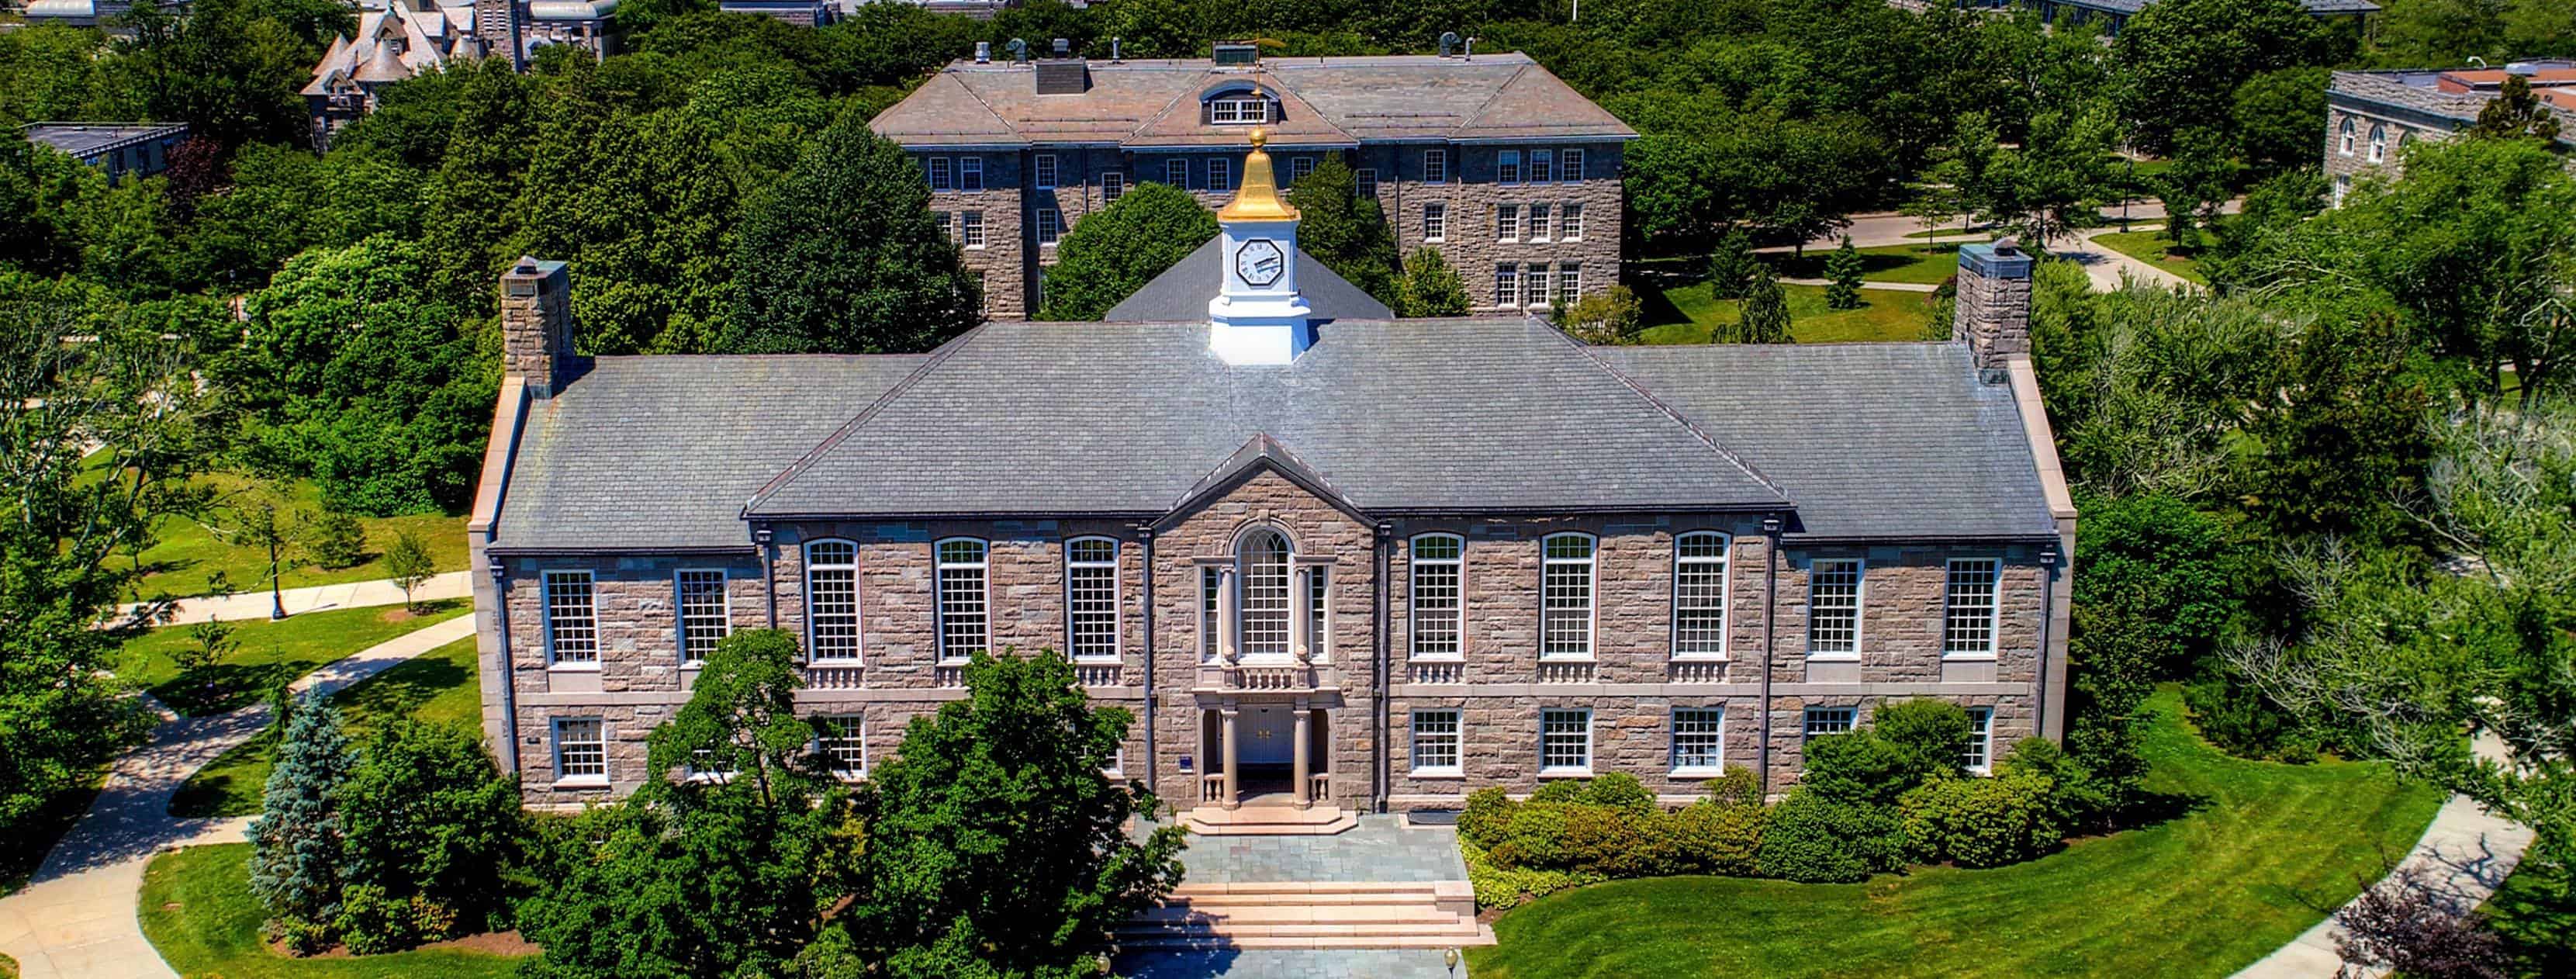 University of Rhode Island Rankings, Tuition, Acceptance Rate, etc.